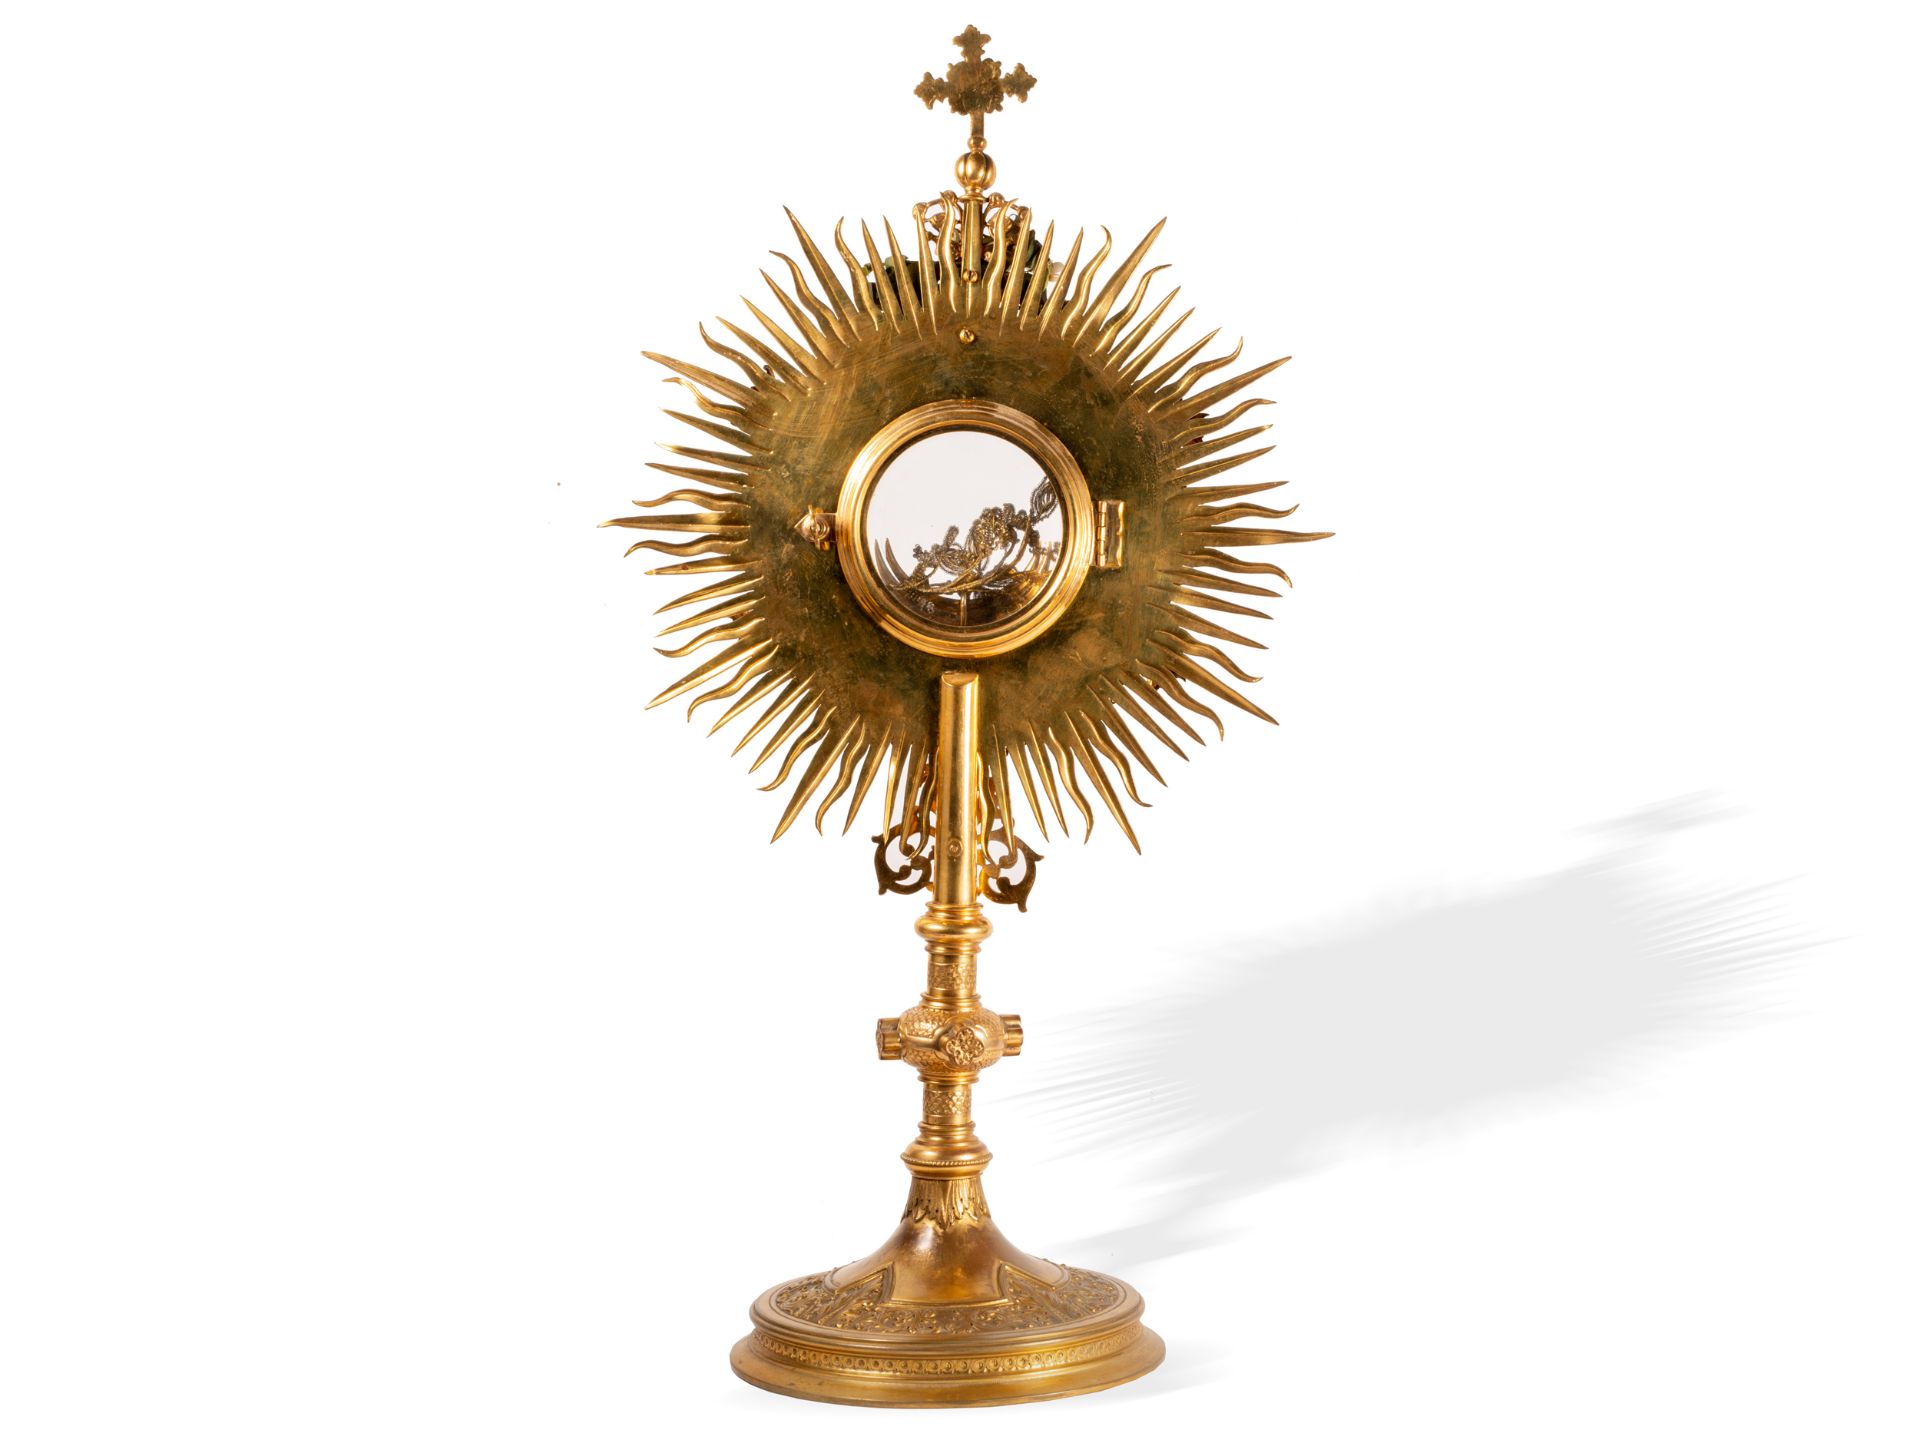 Monstrance, 19th century, Cast brass or bronze, handmolded and engraved - Image 5 of 7